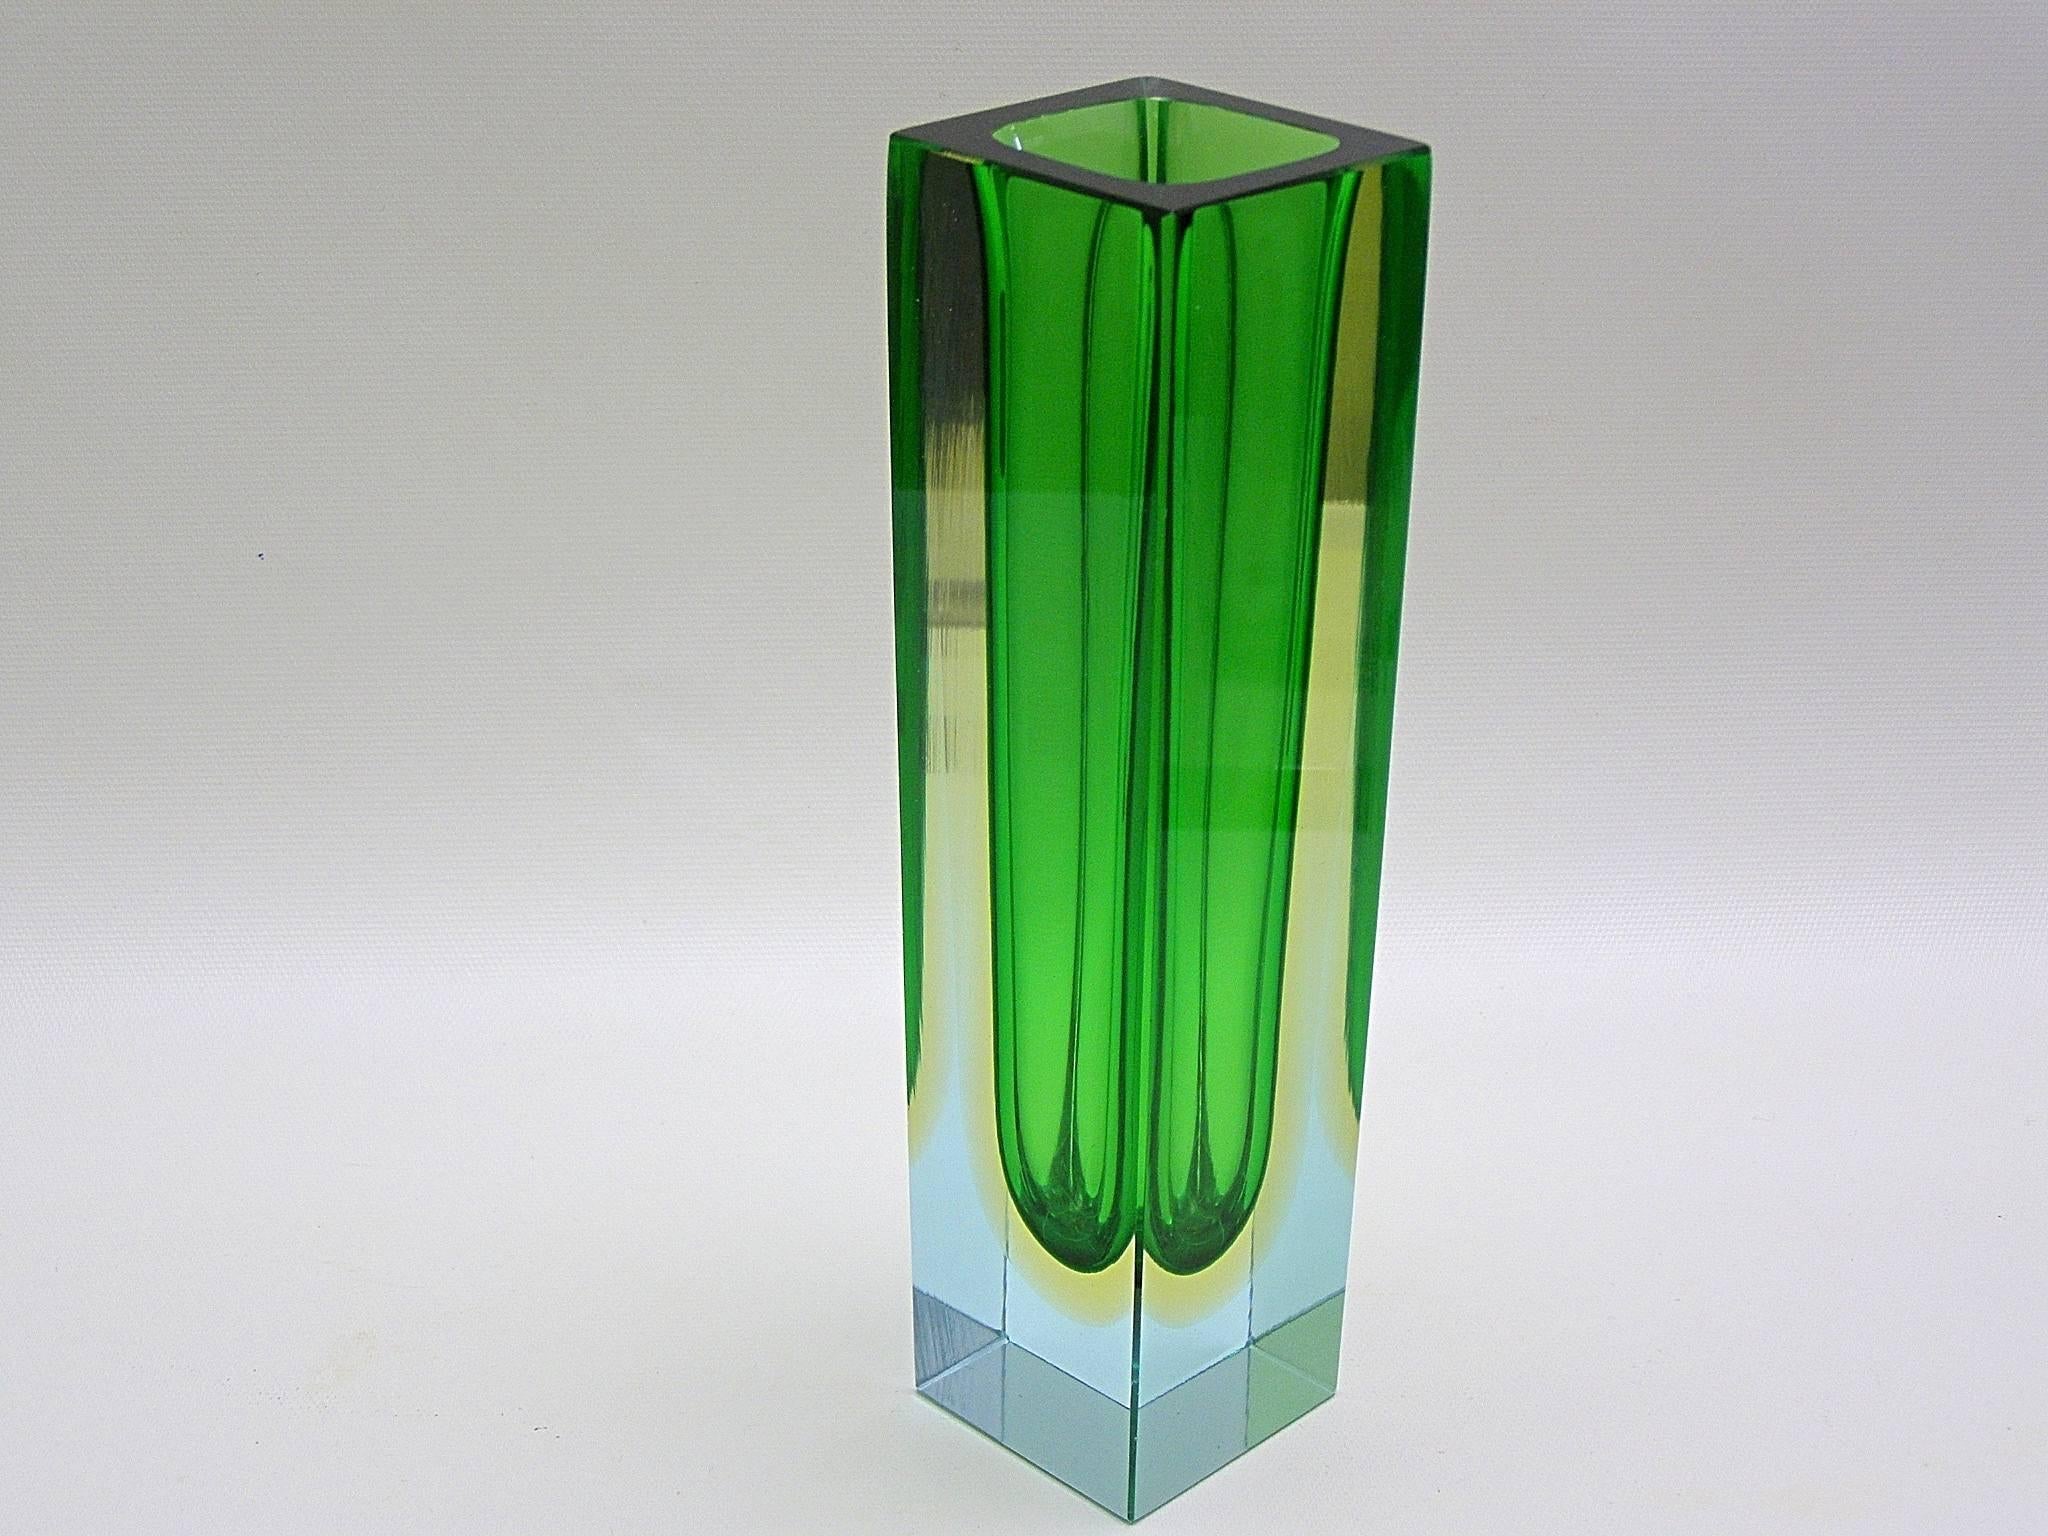 Beautiful Mandruzzato Murano glass vase in triple Sommerso-technique showing the pale blue glass block with rich green interior surrounded by another layer of pale-lemon yellow. Fantastic from every angle with or without flowers.